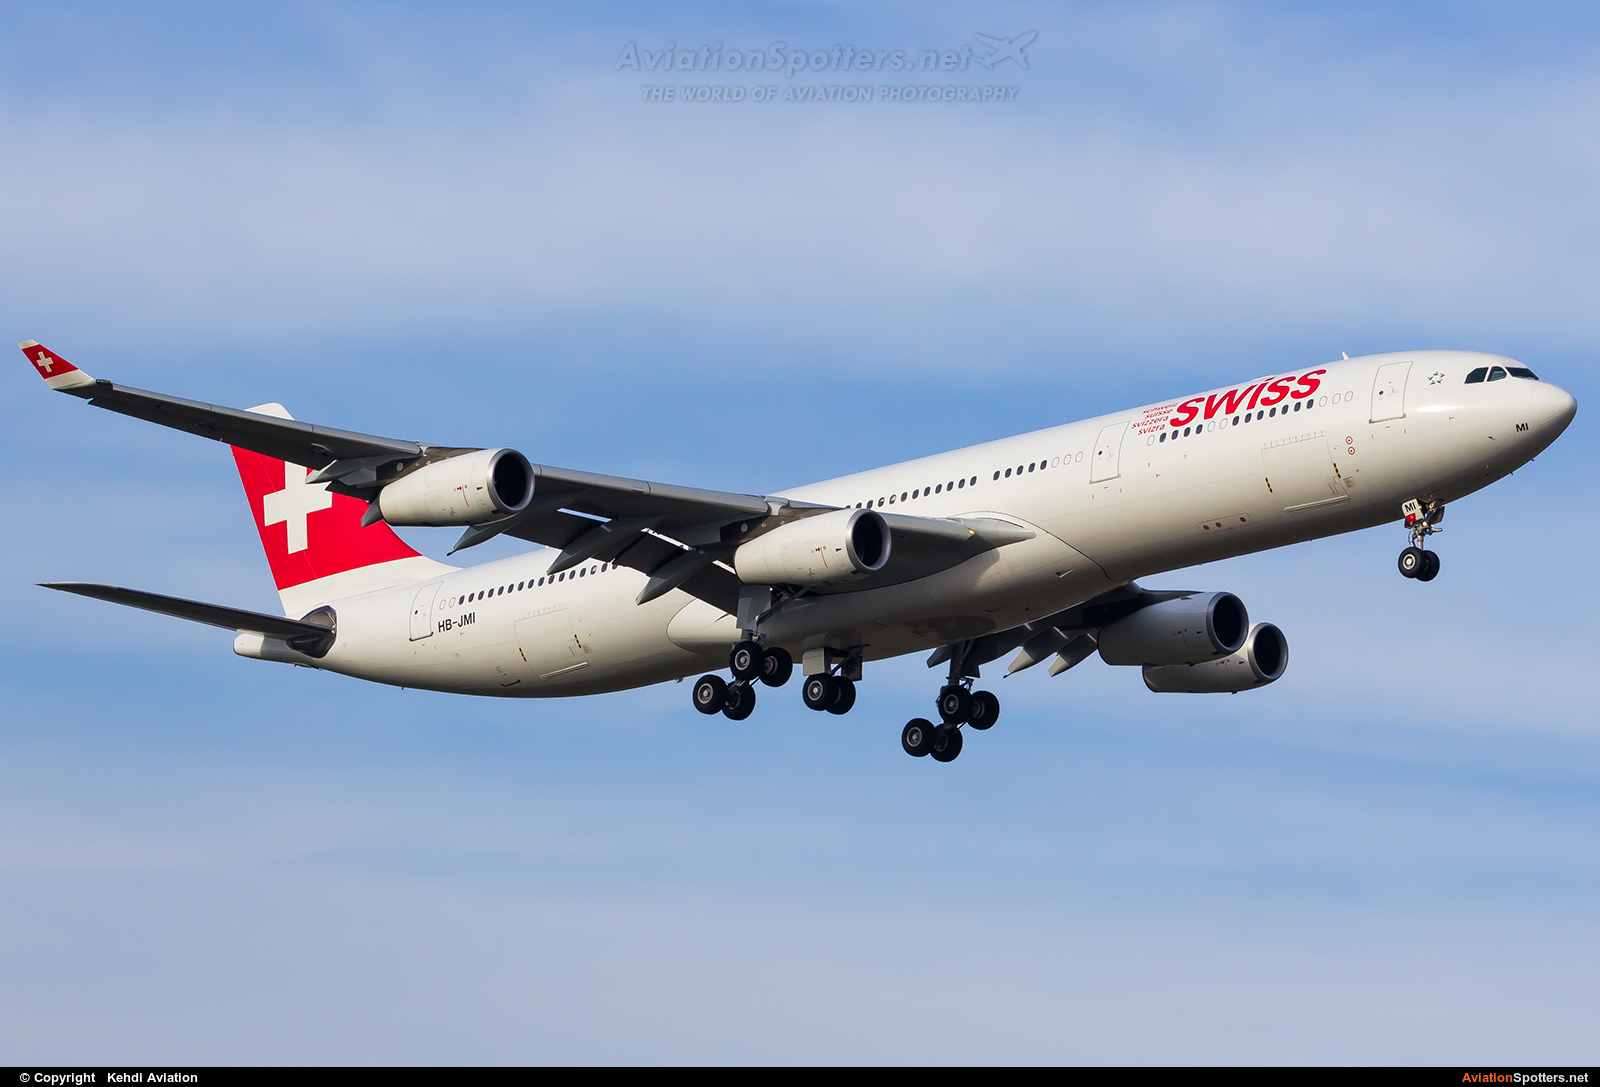 Swiss Airlines  -  A340-300  (HB-JMI) By Kehdi Aviation (Kehdi Aviation)